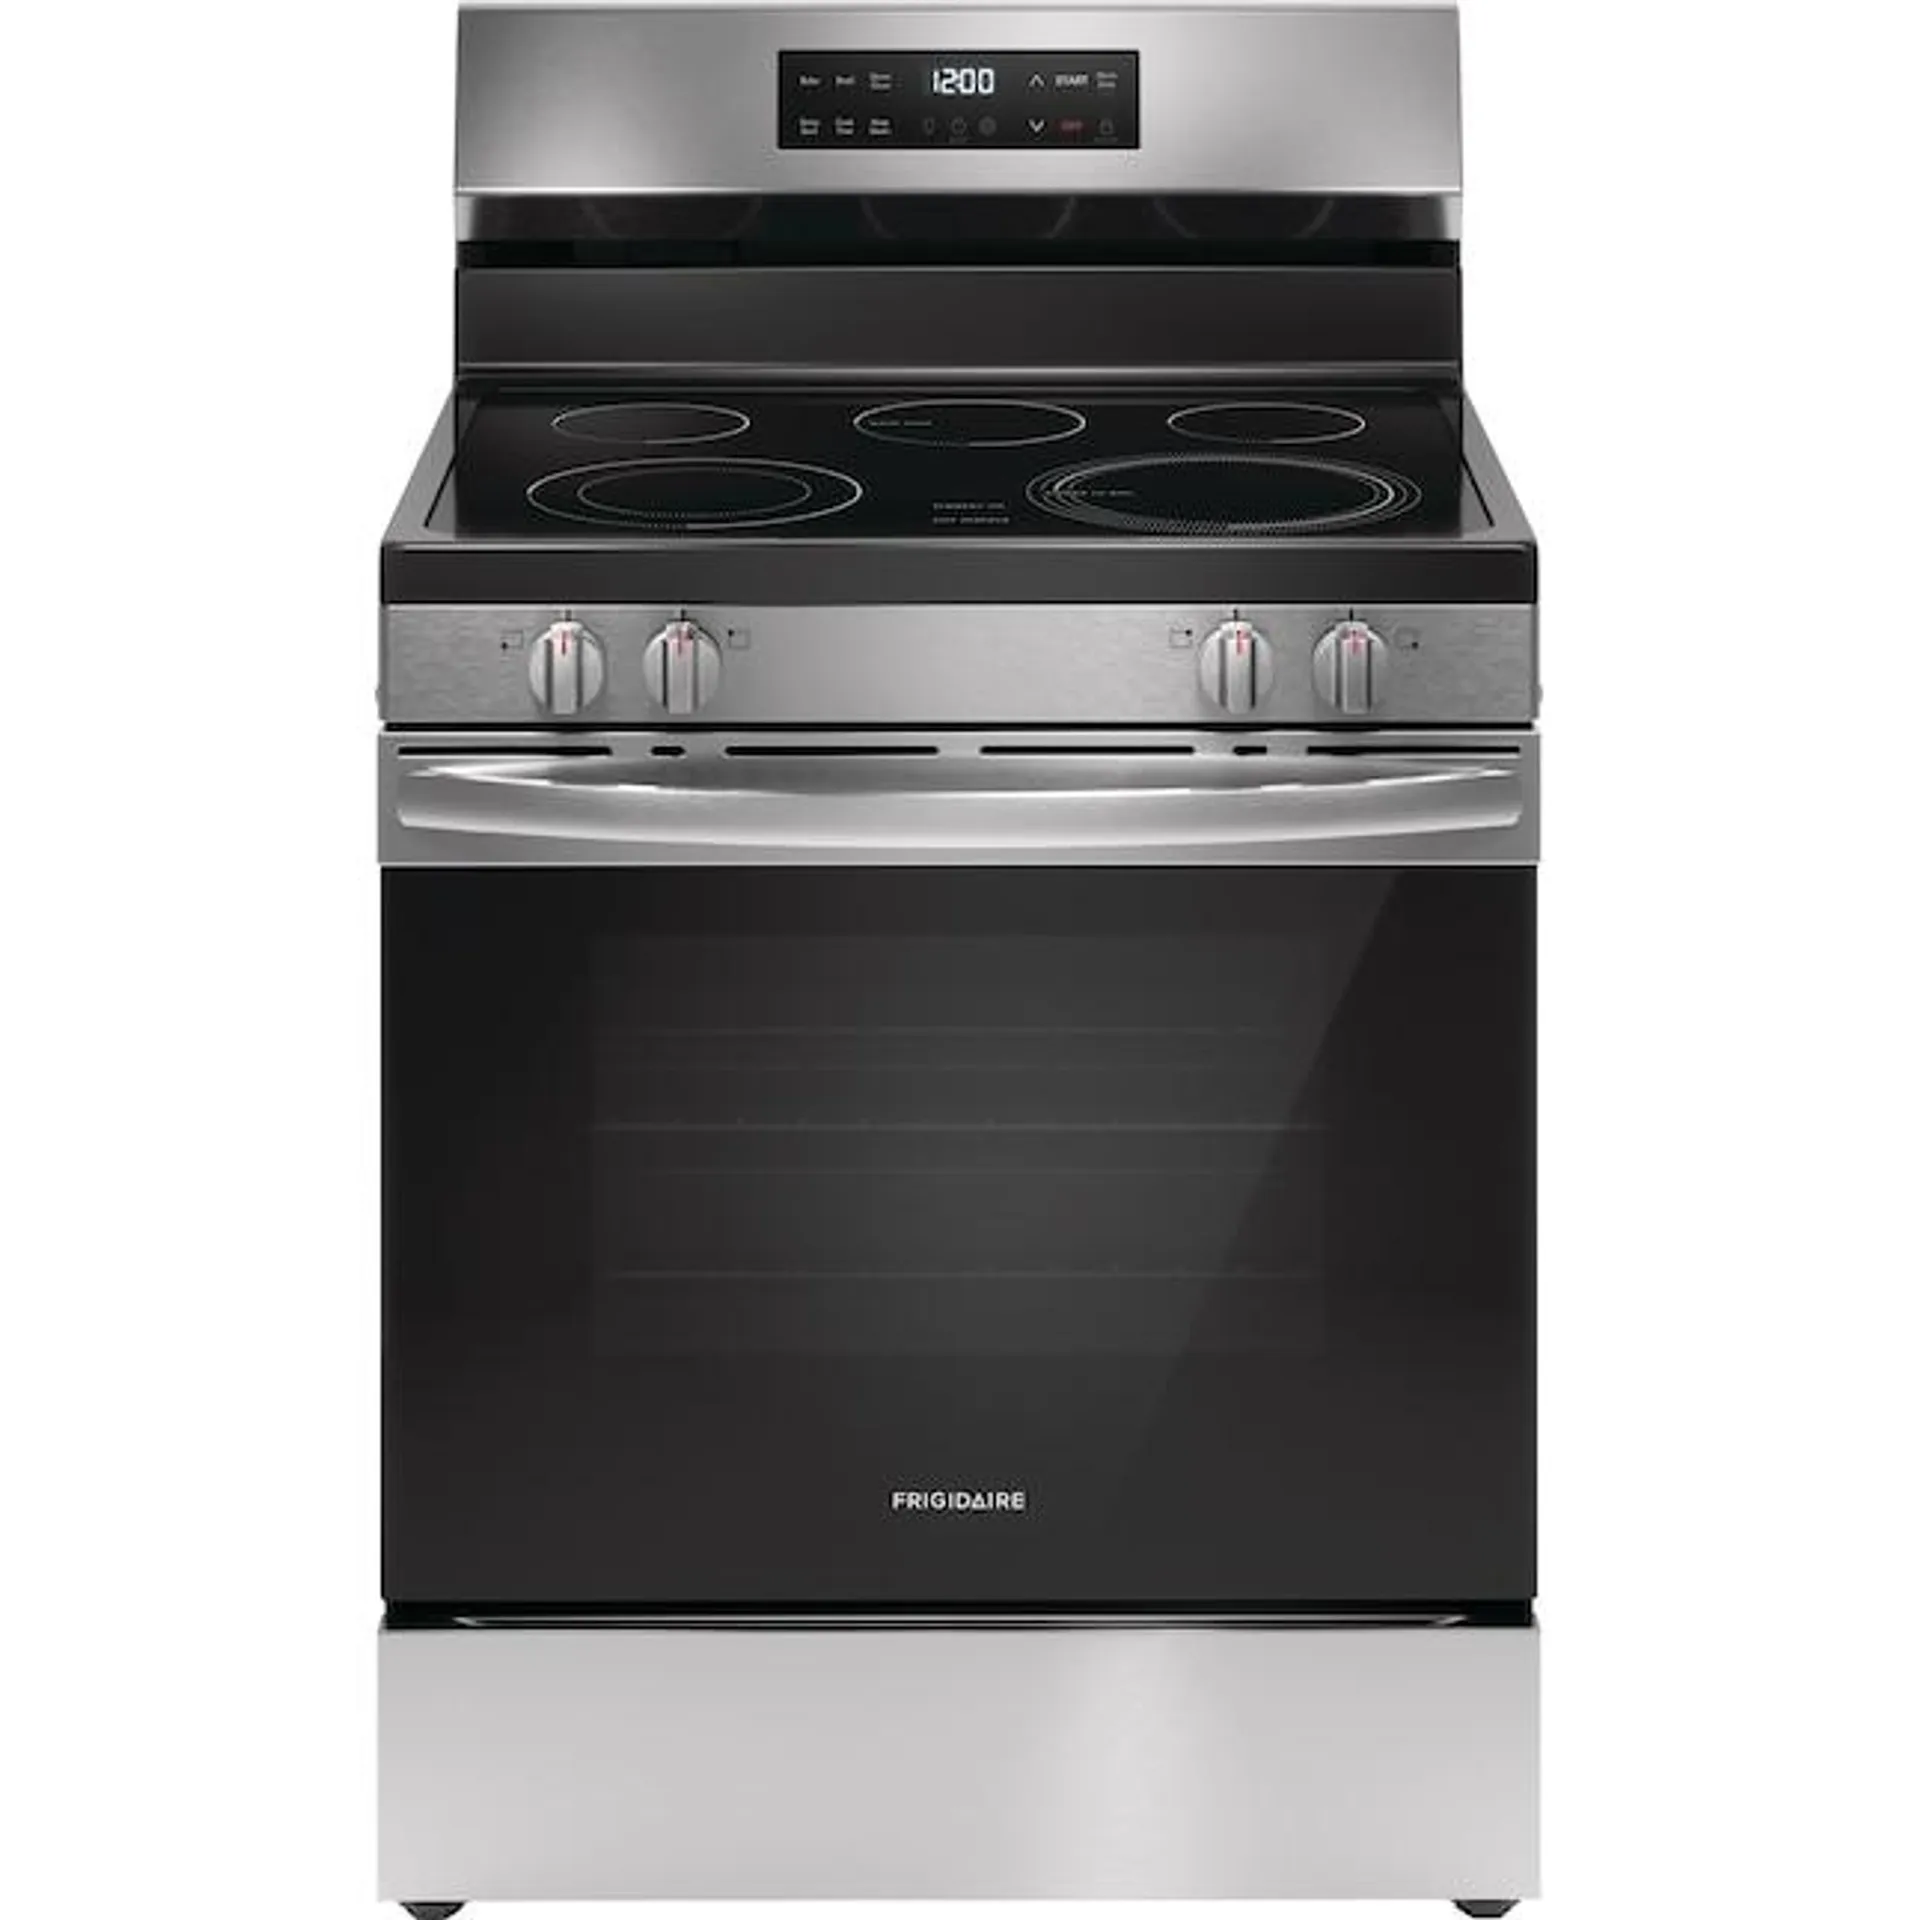 Frigidaire 30-in Glass Top 5 Burners 5.3-cu ft Steam Cleaning Freestanding Electric Range (Fingerprint Resistant Stainless Steel)